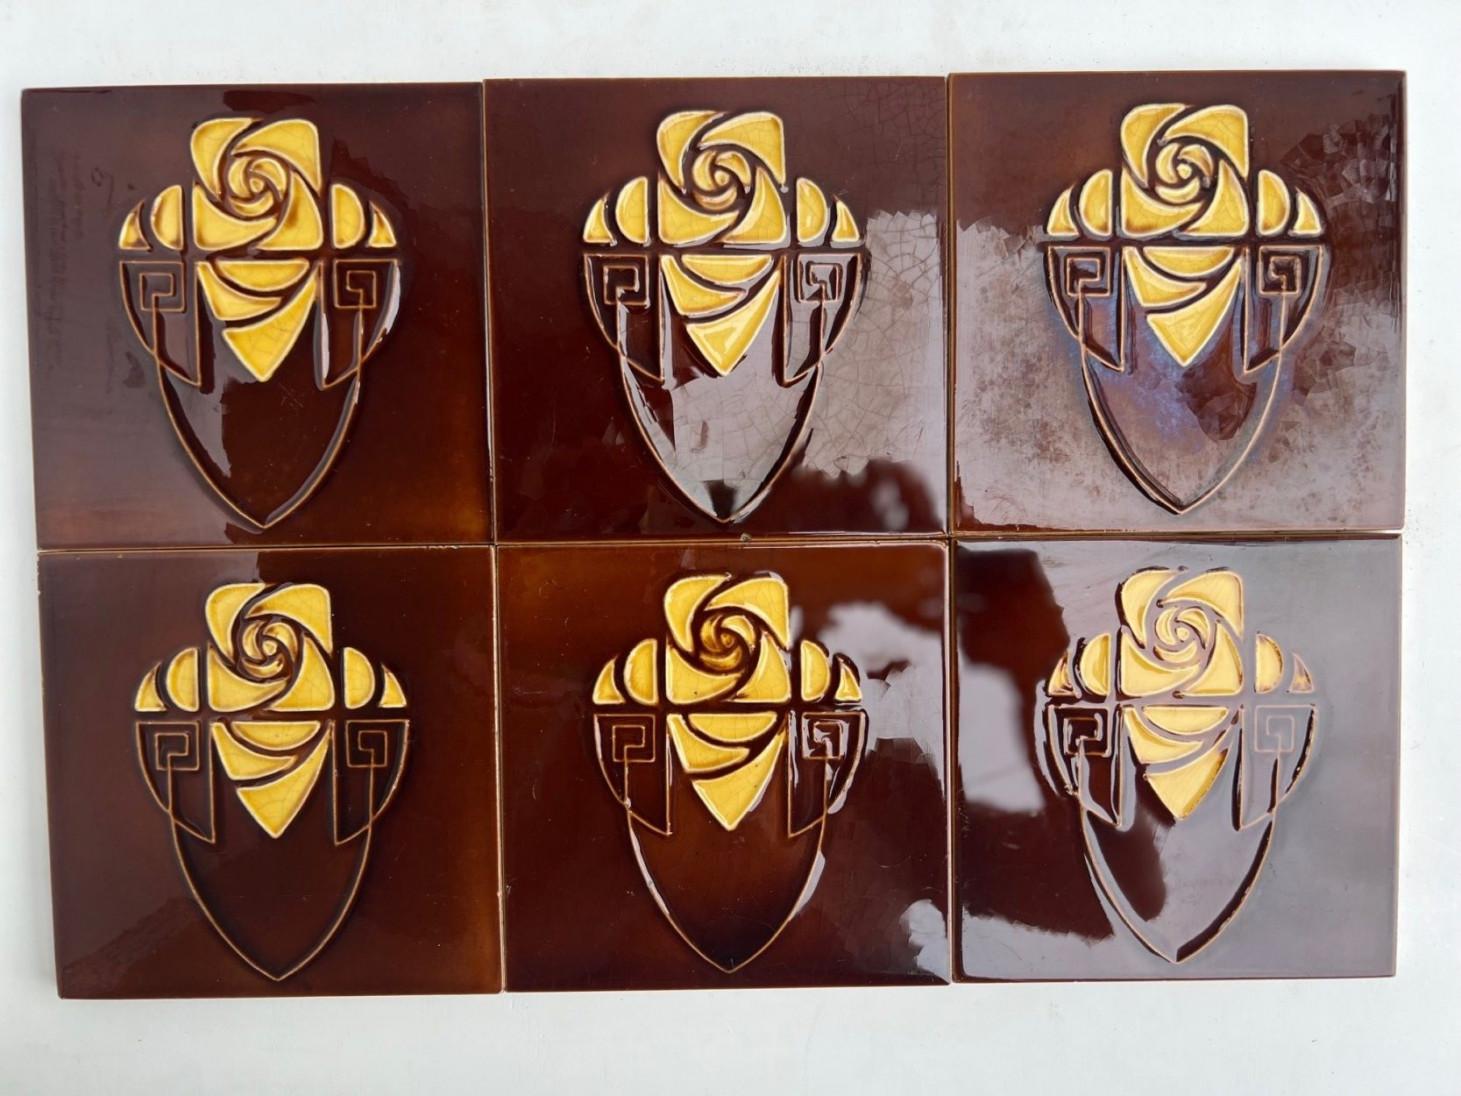 Brown and Yellow Art Nouveau Glazed Relief Tiles by Gilliot, Hemiksem, circa 192 In Fair Condition For Sale In Rijssen, NL